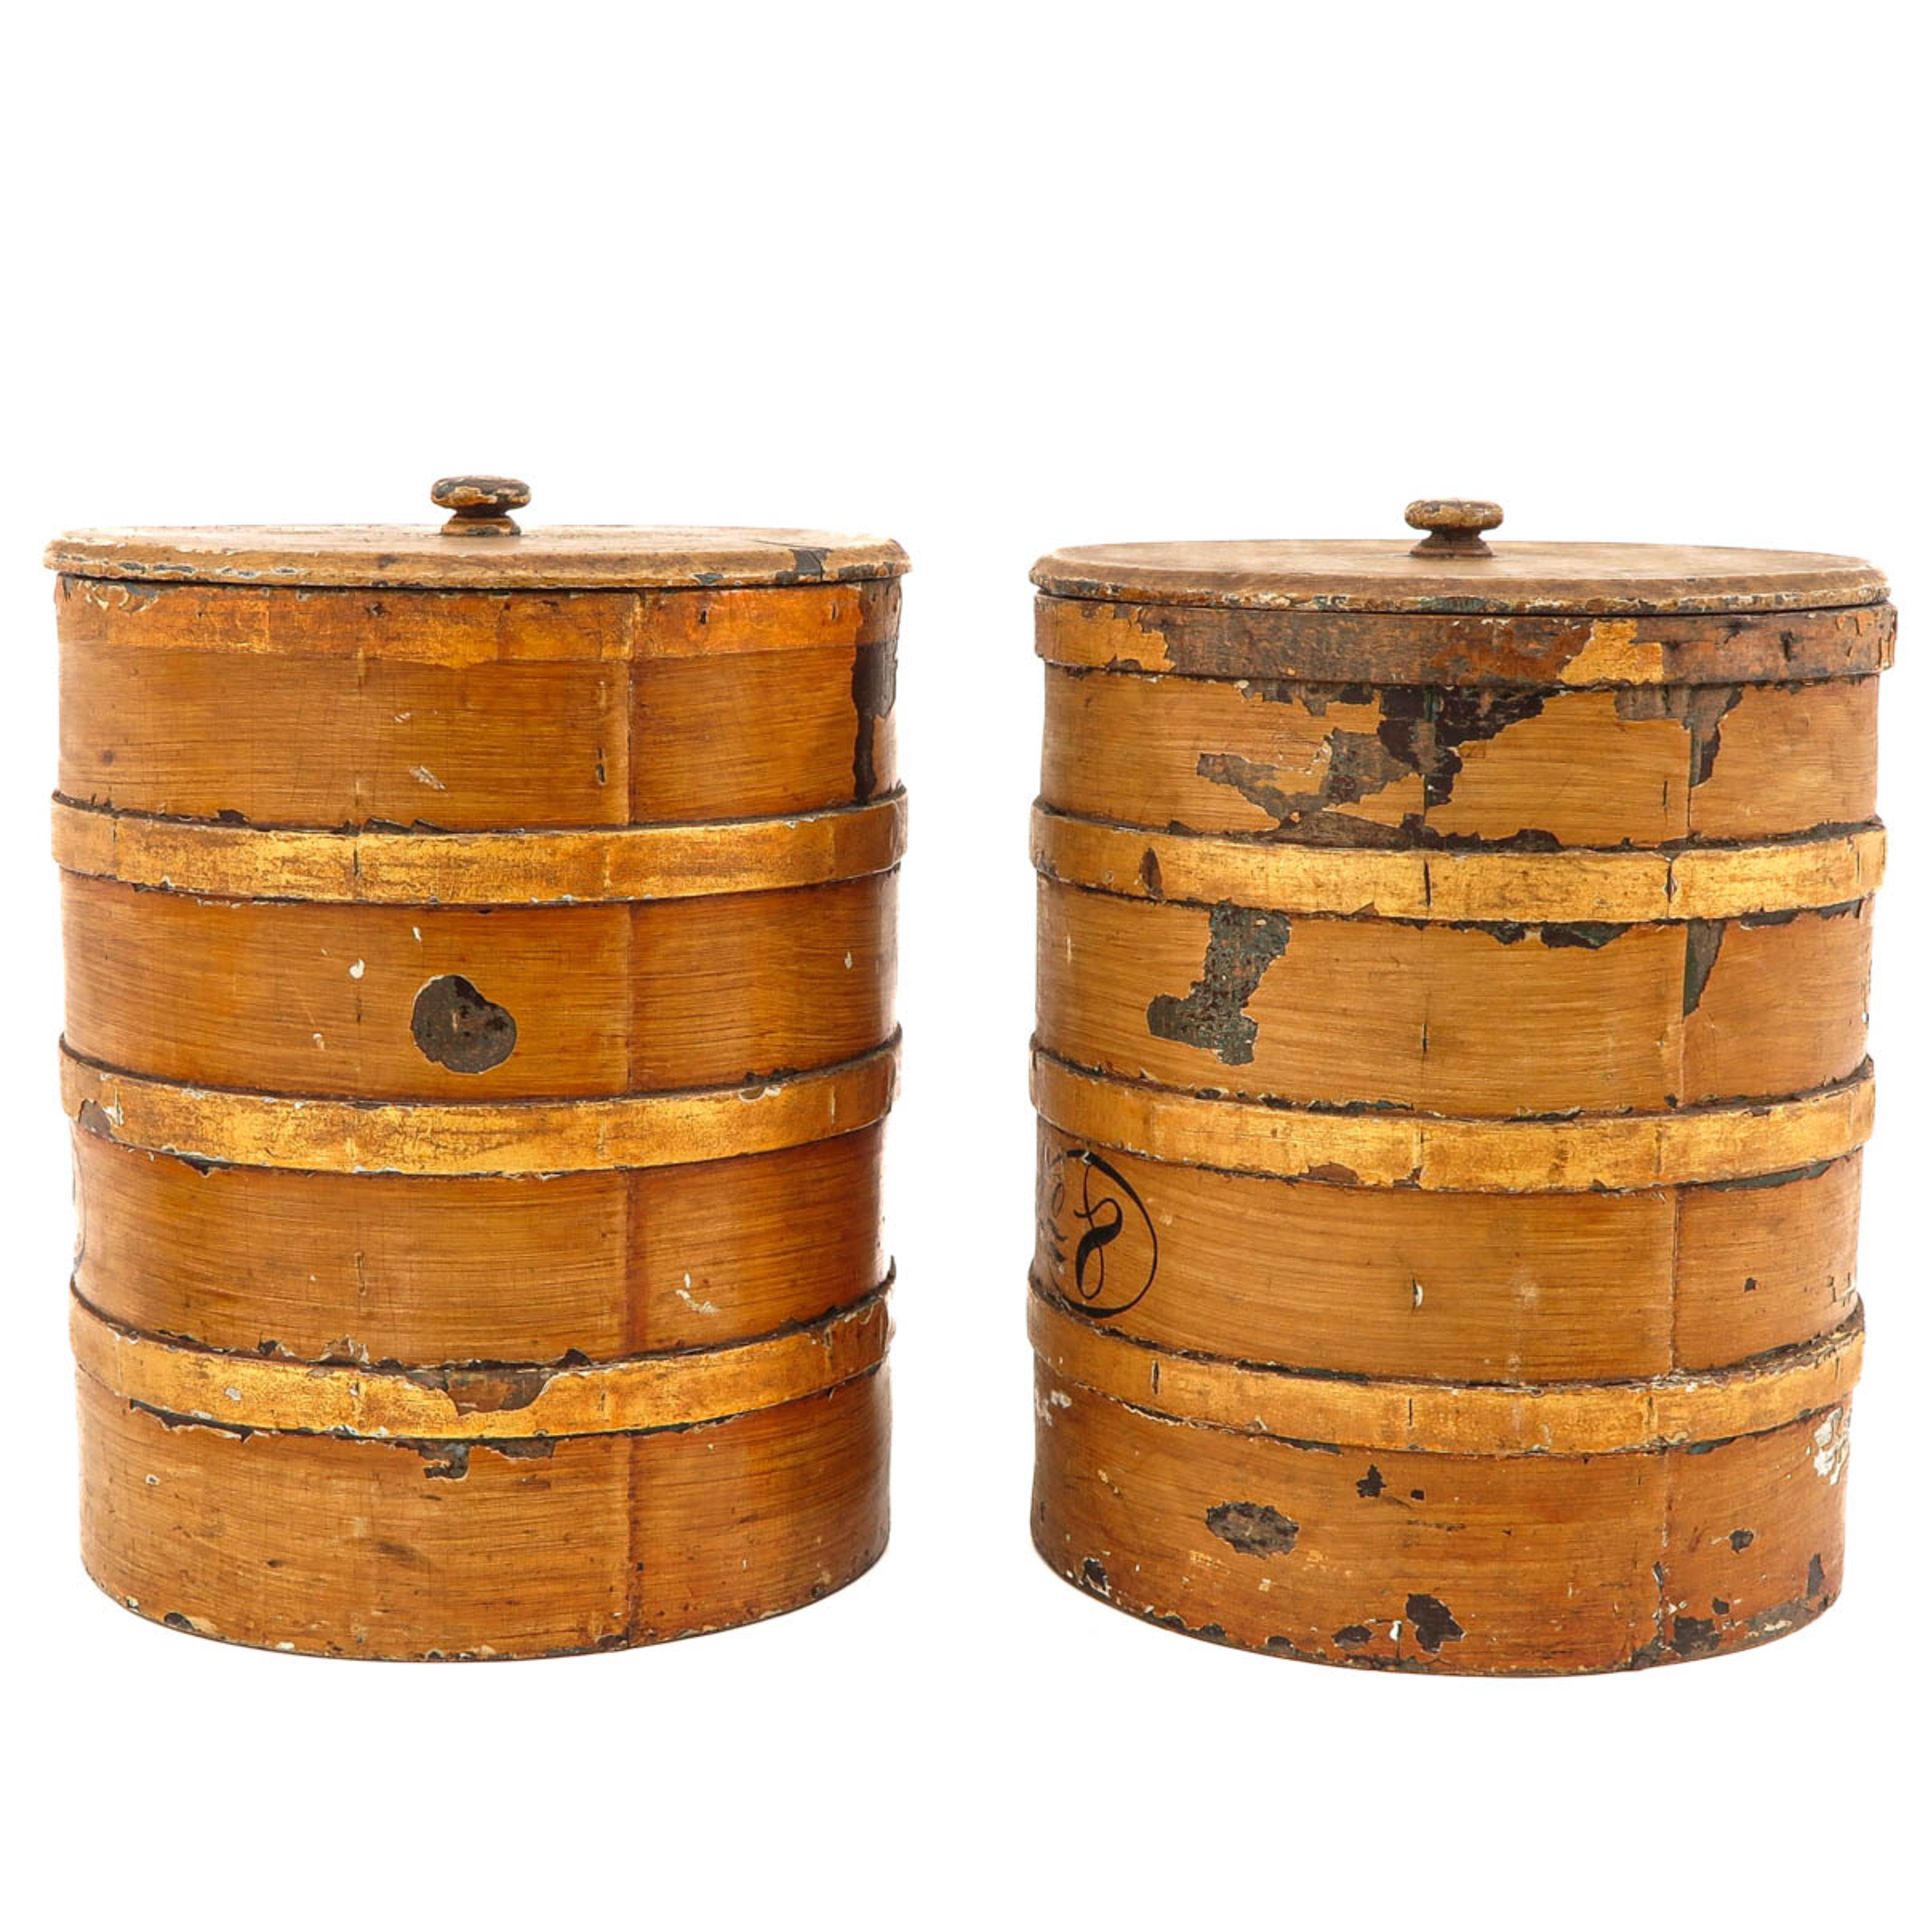 A Pair of Wooden Barrels - Image 2 of 9